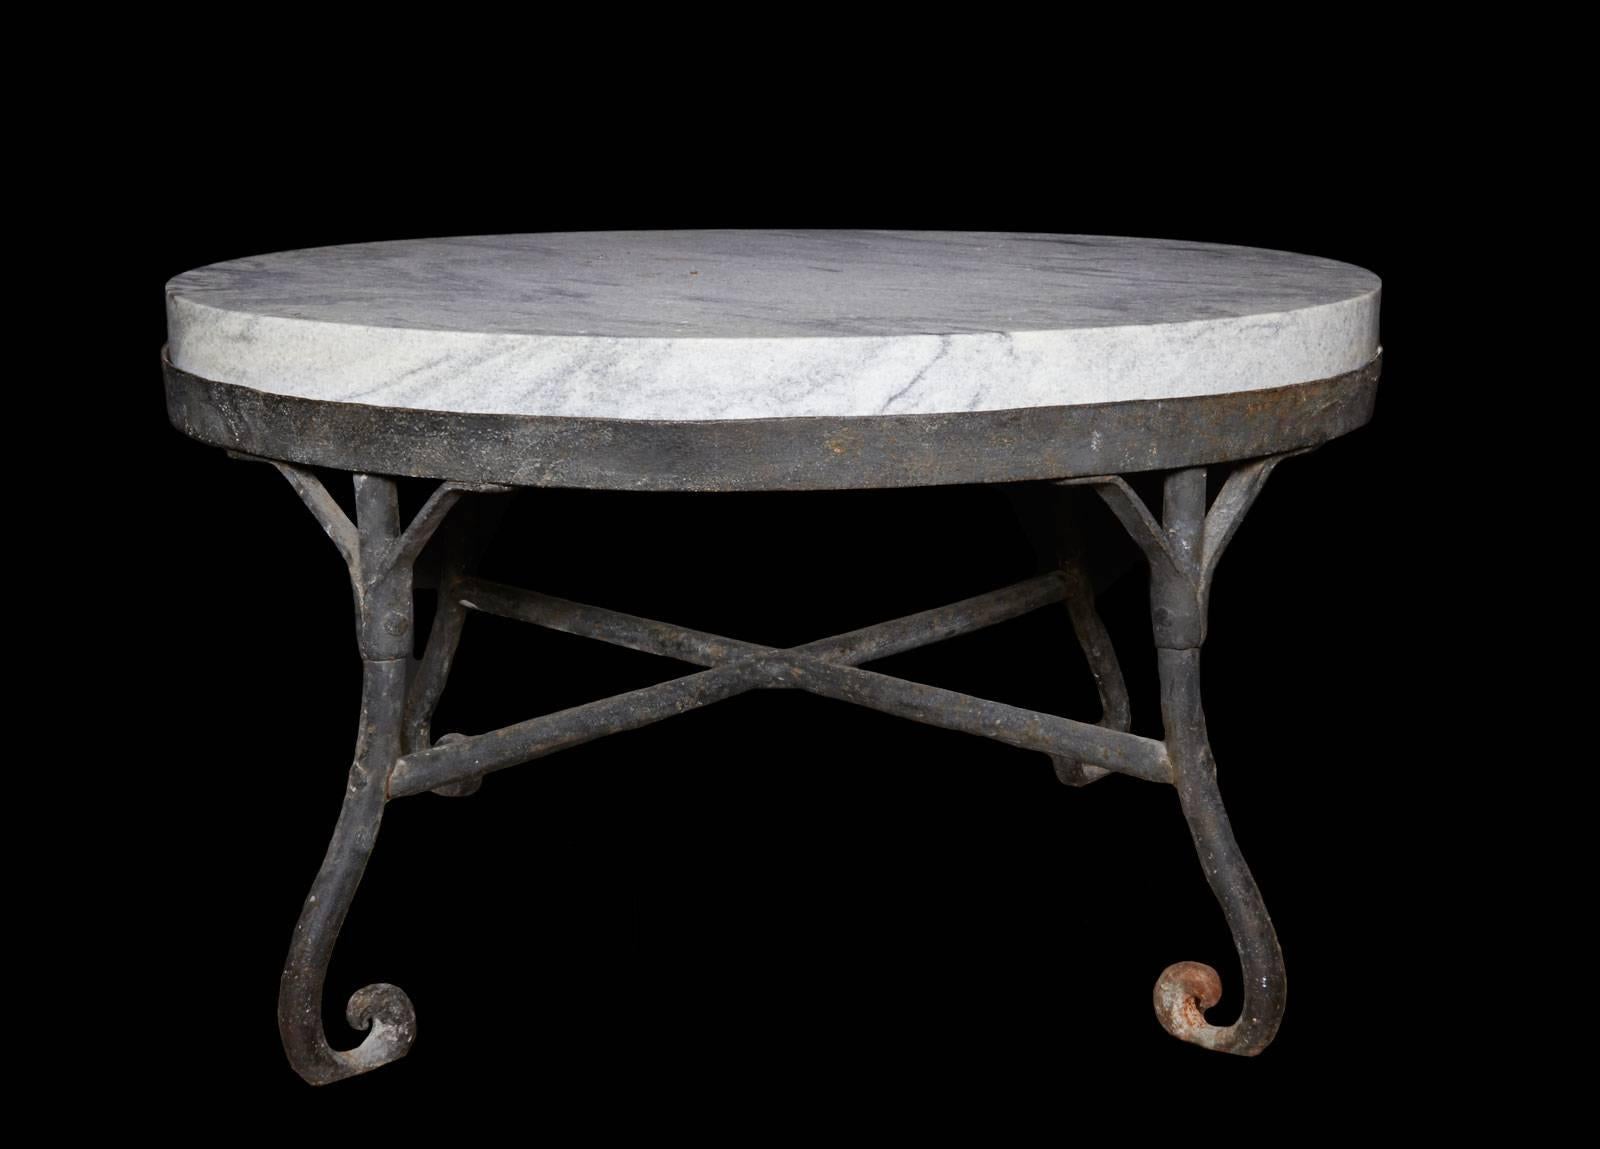 Fabulous early 19th century hand-forged iron table with a marble tabletop that is an astonishing 3 inches thick, fabricated from slabs of marble removed from the entrance of Independence Hall in Philadelphia.